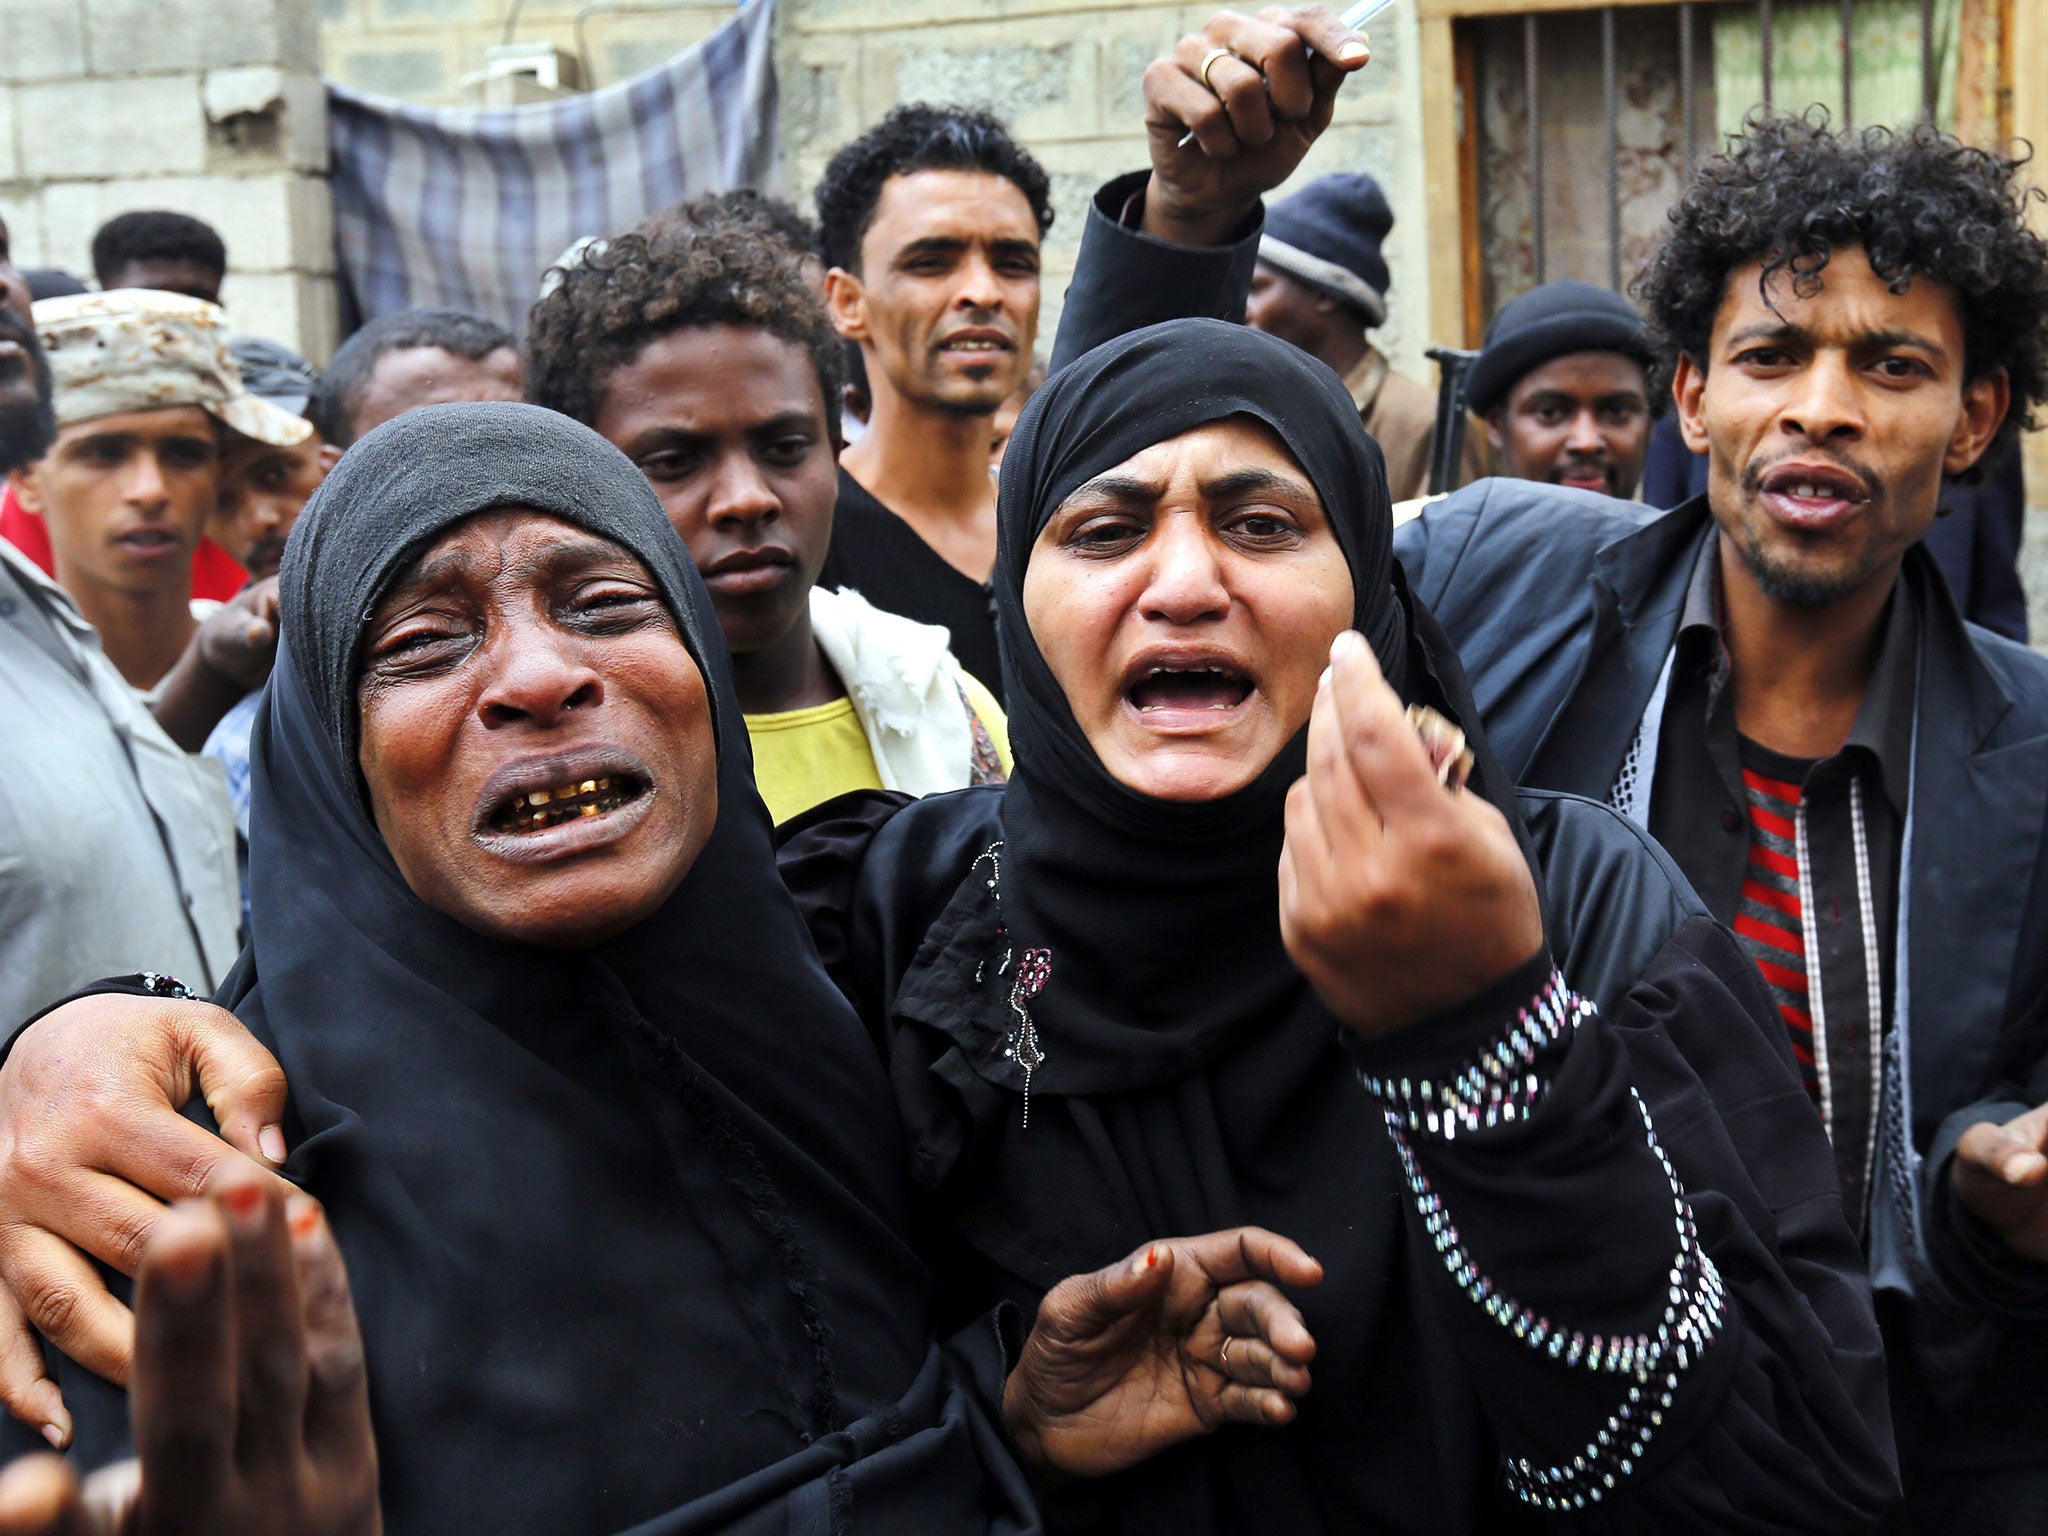 Yemenis react after air strikes carried out by the Saudi-led coalition killed dozens in Sanaa